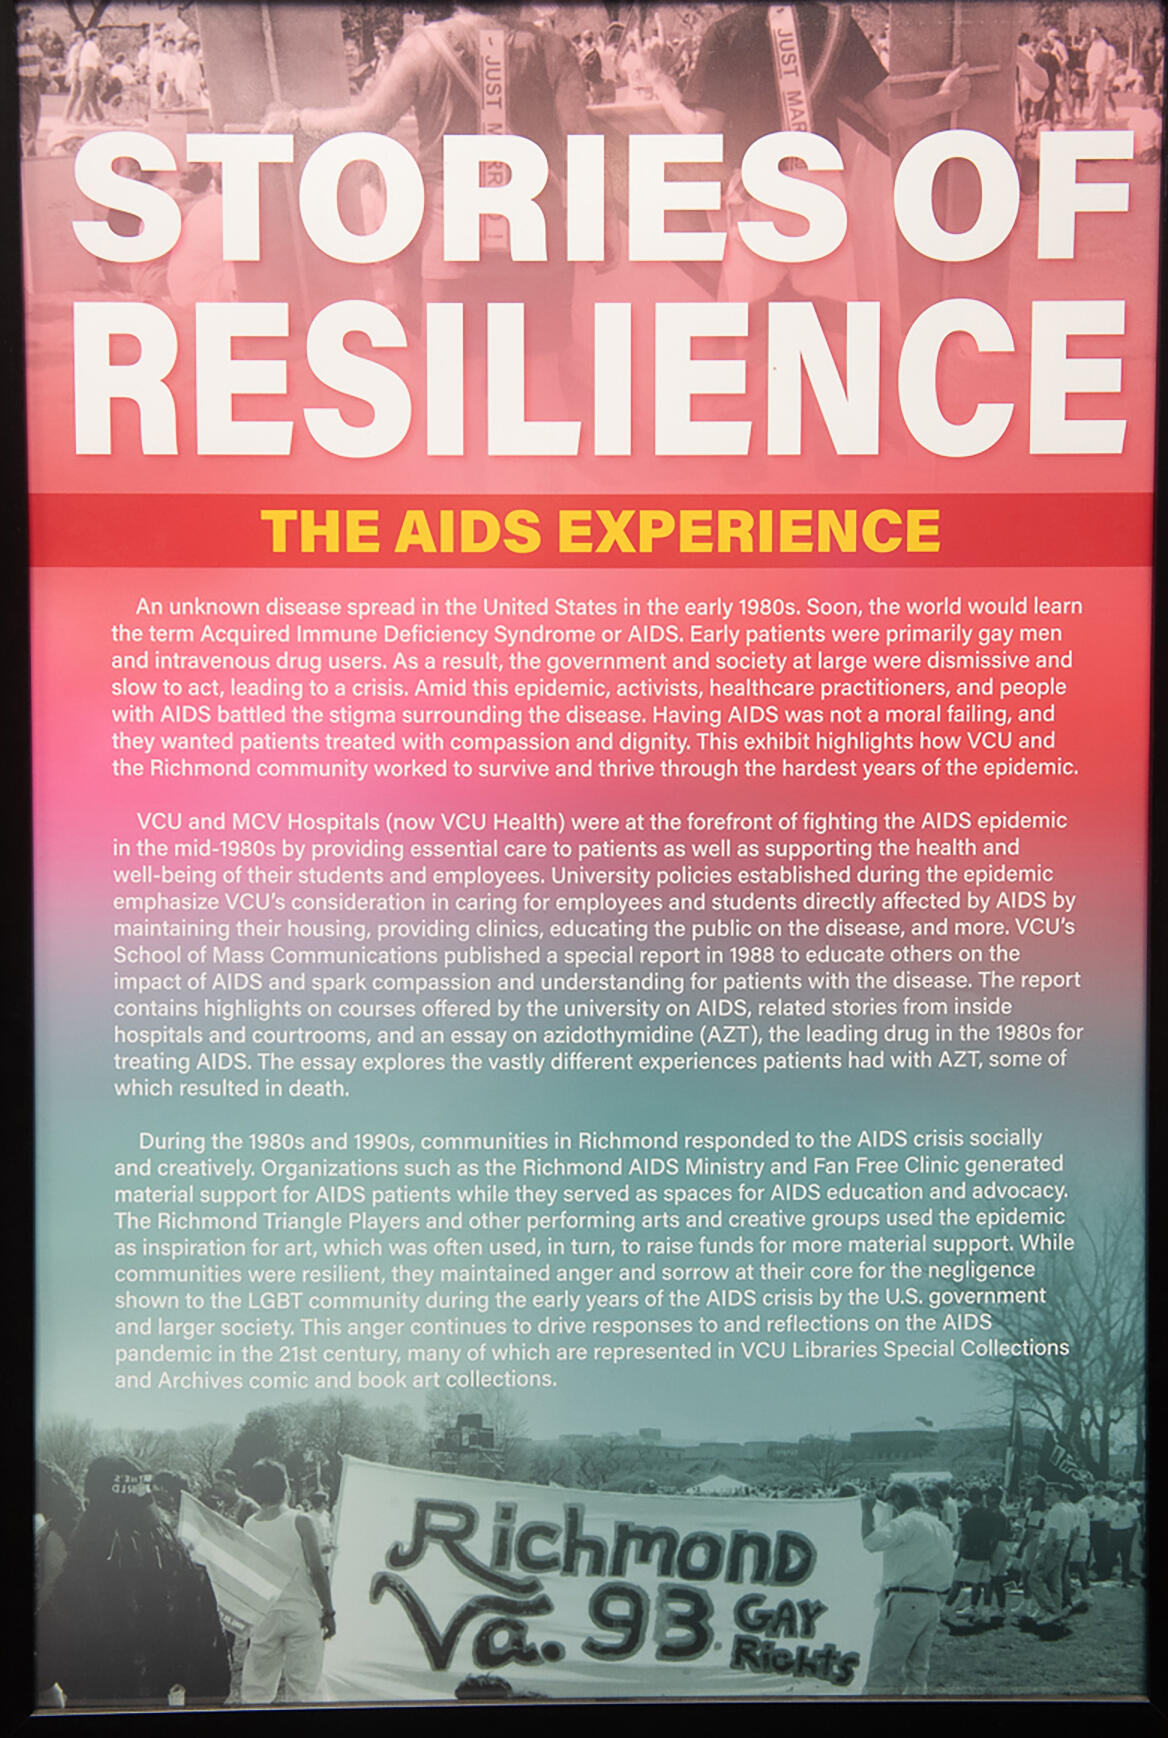 A photo of a poster for the “The AIDS Experience: Stories of Resilience” exhibit